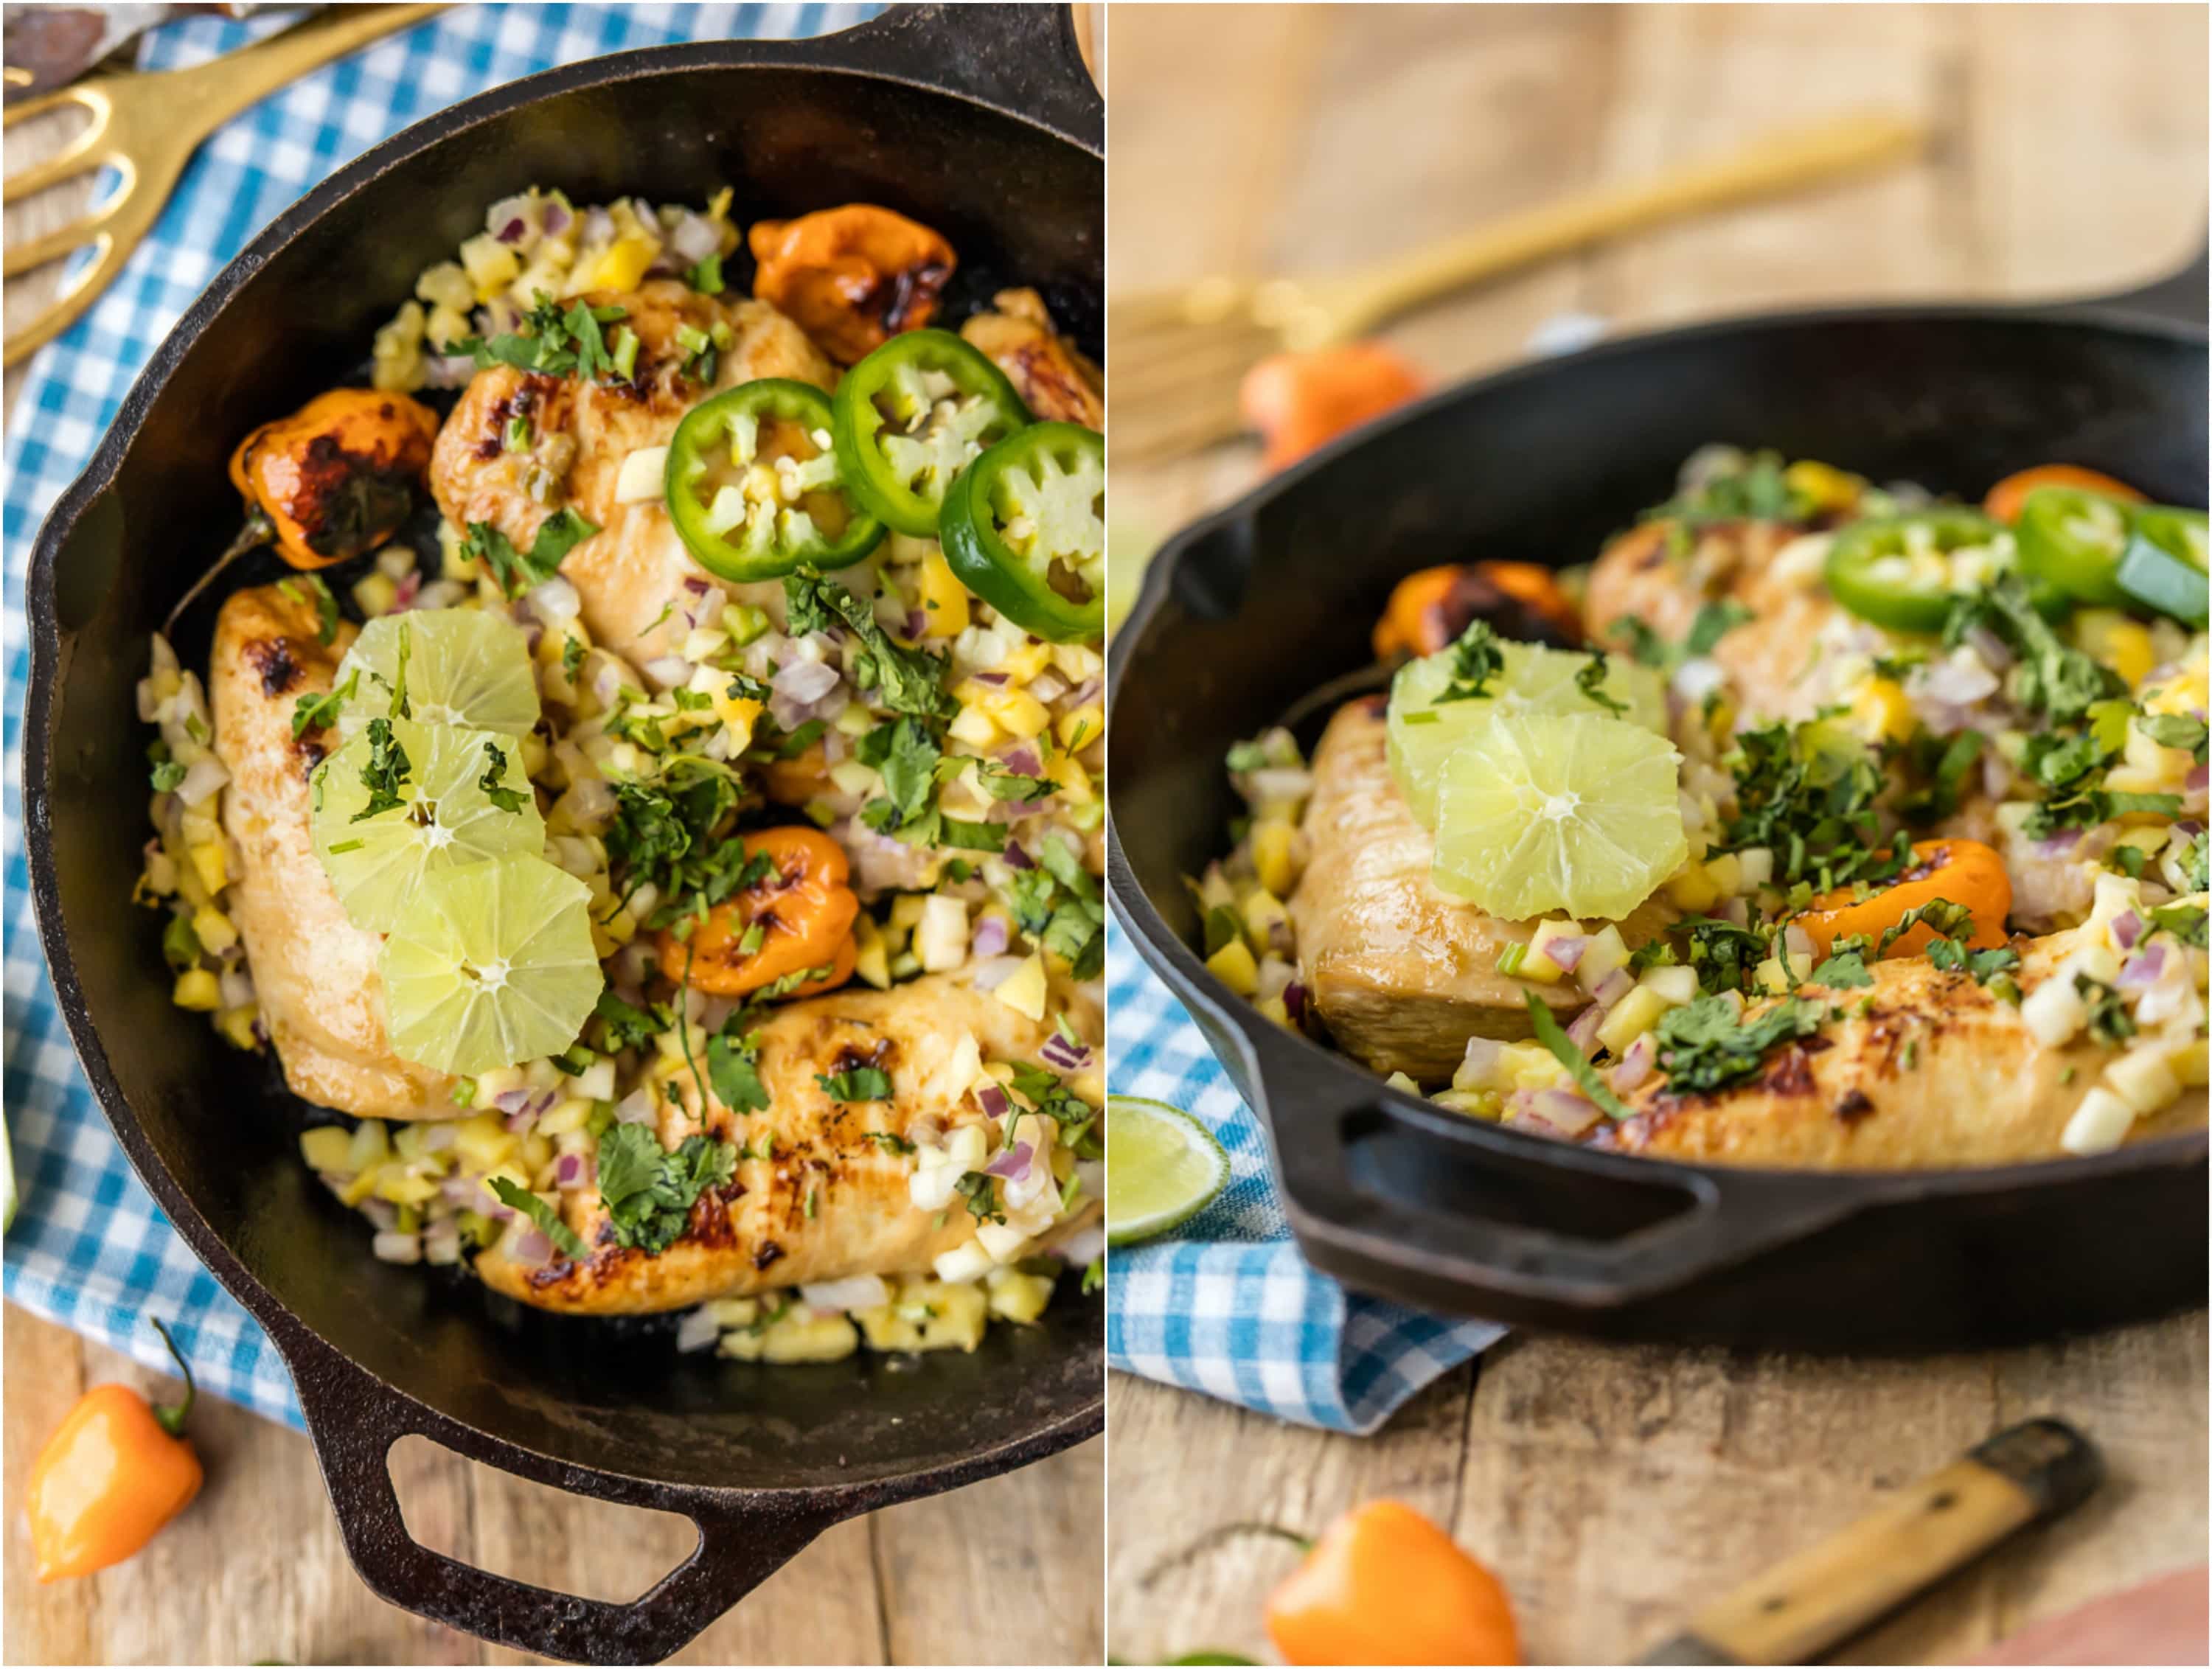 Make this SKINNY ONE PAN CARIBBEAN JERK CHICKEN SKILLET in just 15 minutes! Topped with mango salsa for a cool kick. A delicious and easy weeknight meal!